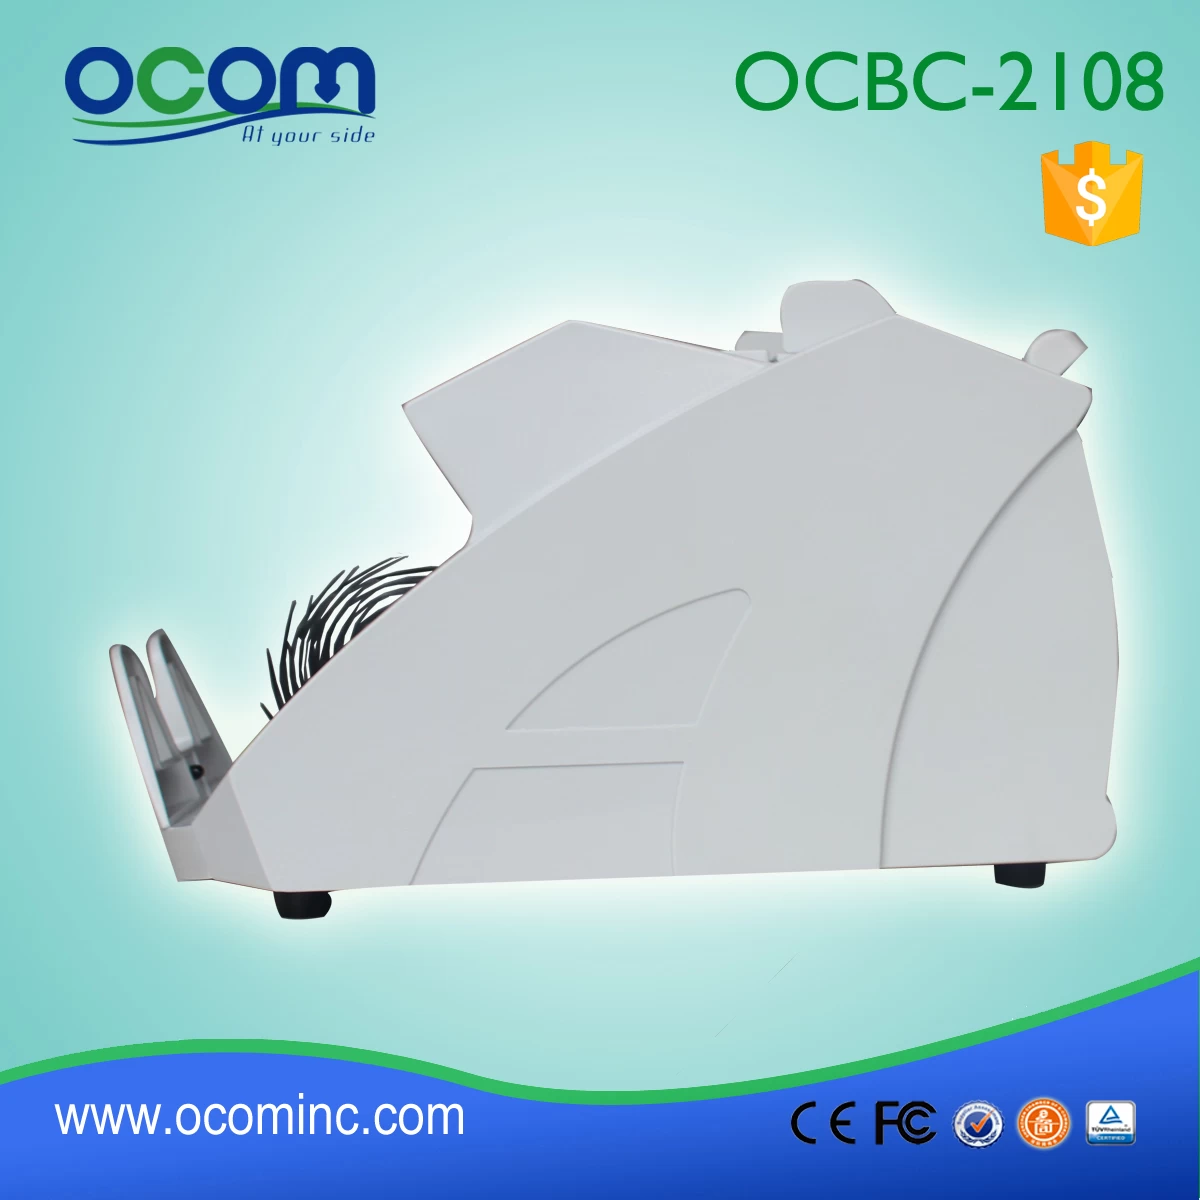 (OCBC-2108)--OCOM made 2016 newest banknote counter with uv mg